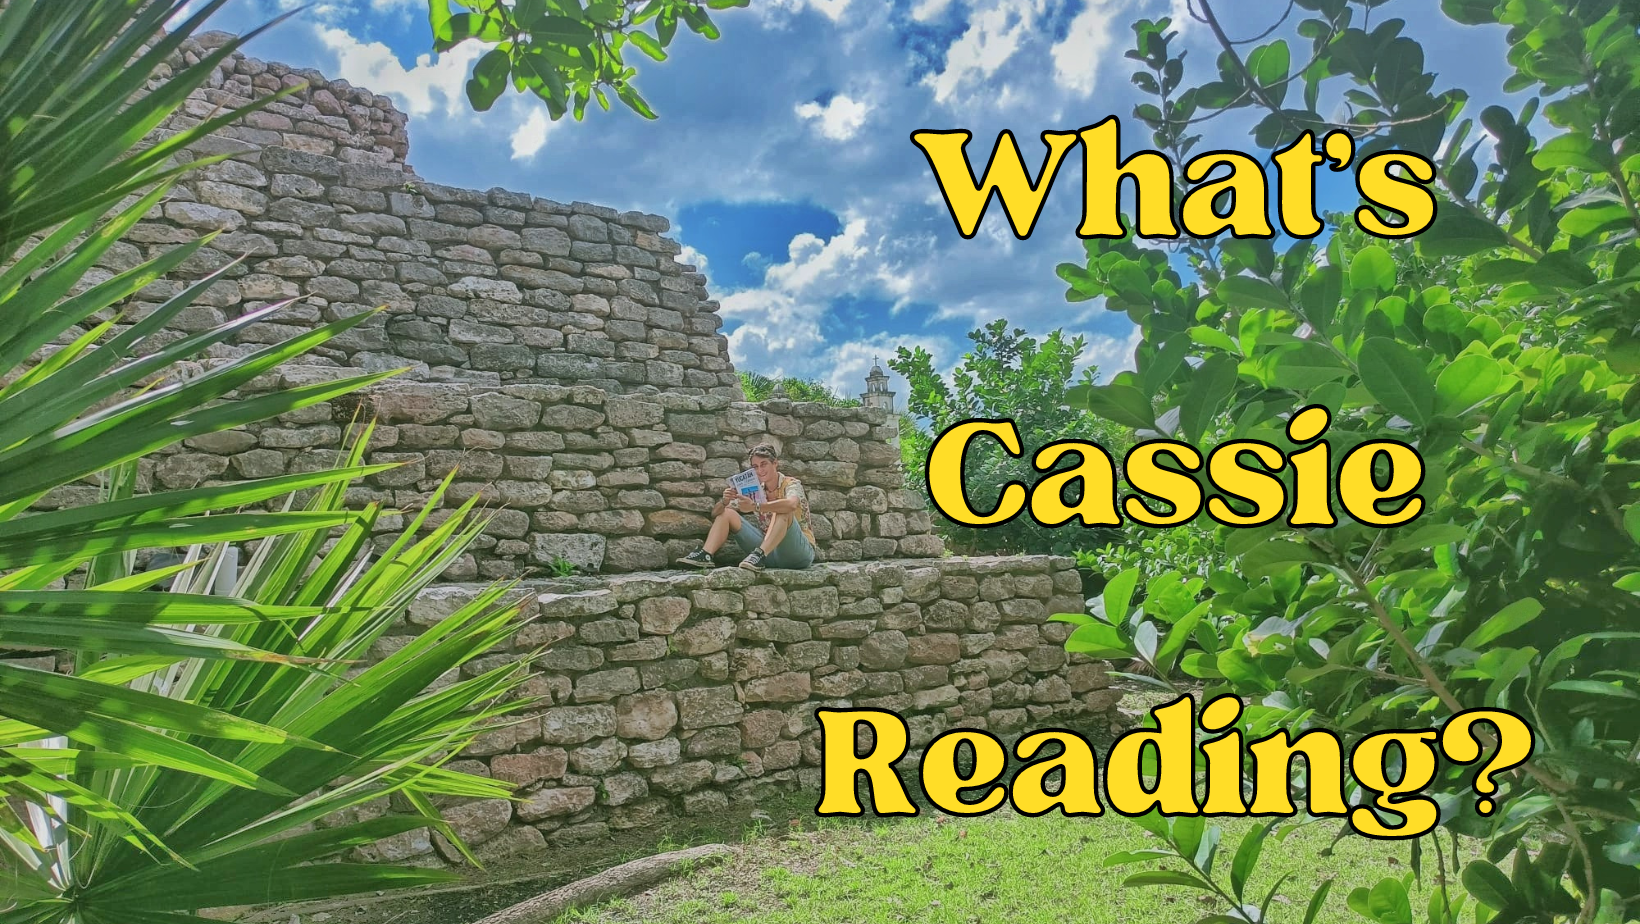 Cassie sitting on a pyramid in Mexico reading a book. Yellow text says, "what's Cassie Reading?"